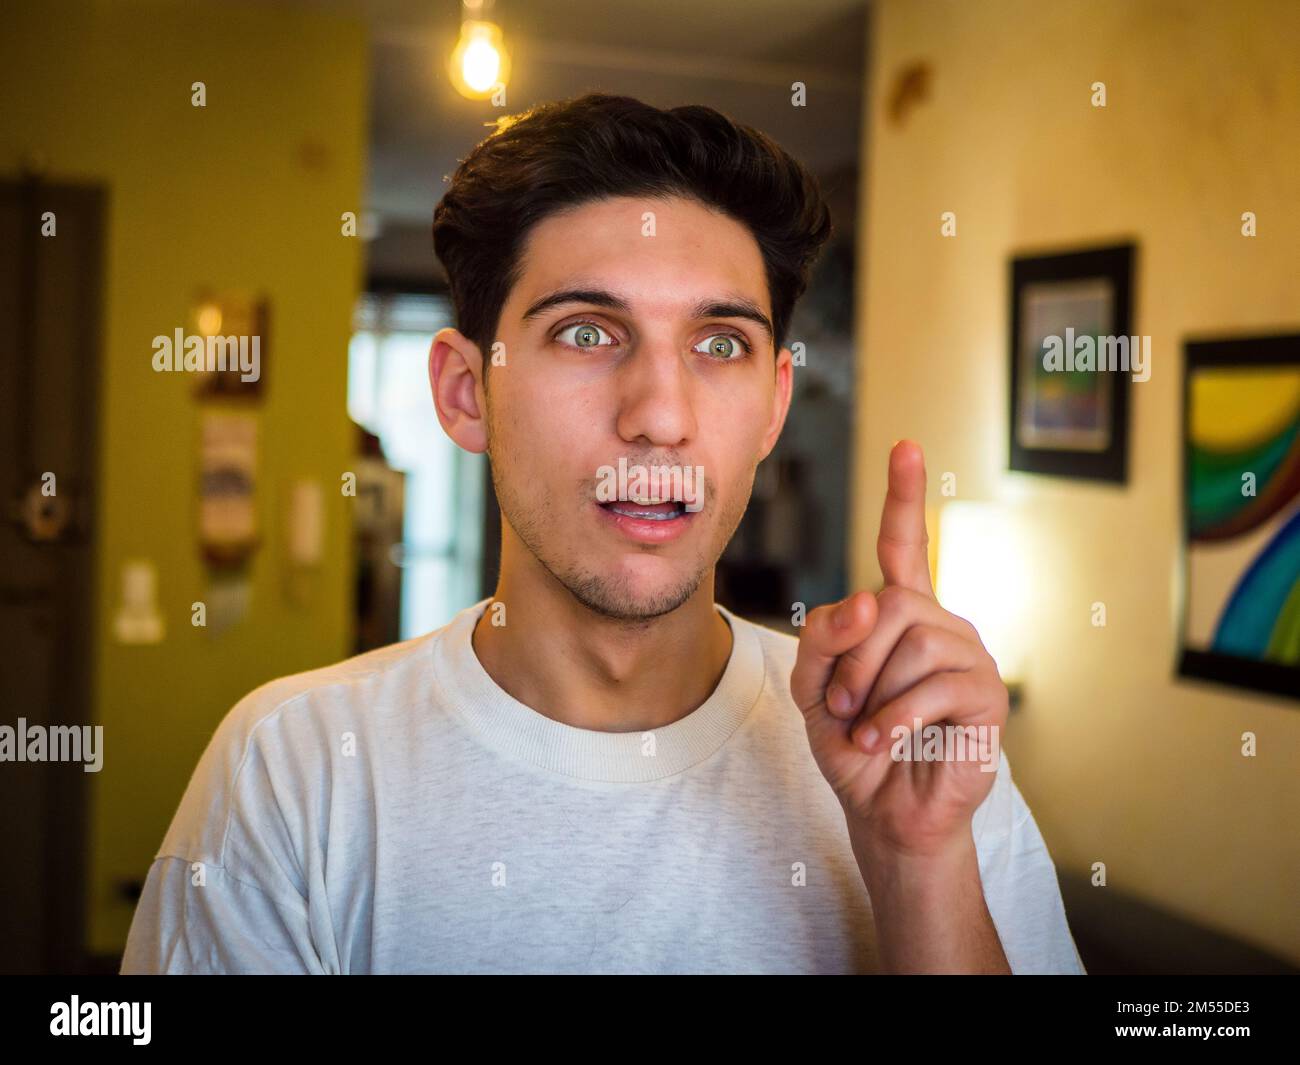 Astonished young man having idea at home Stock Photo